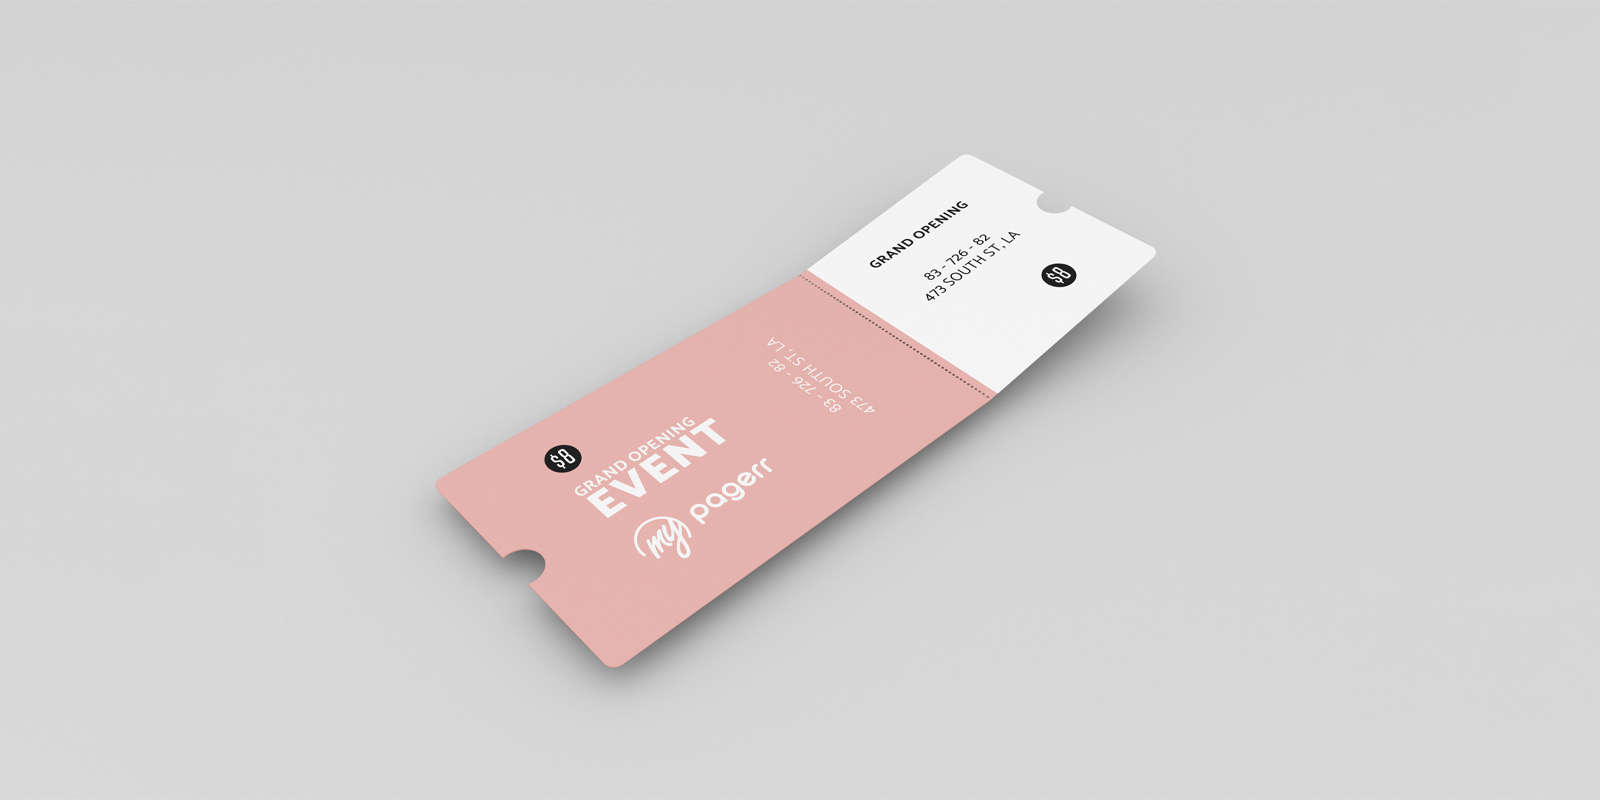 Tickets in Madrid - Print with Pagerr